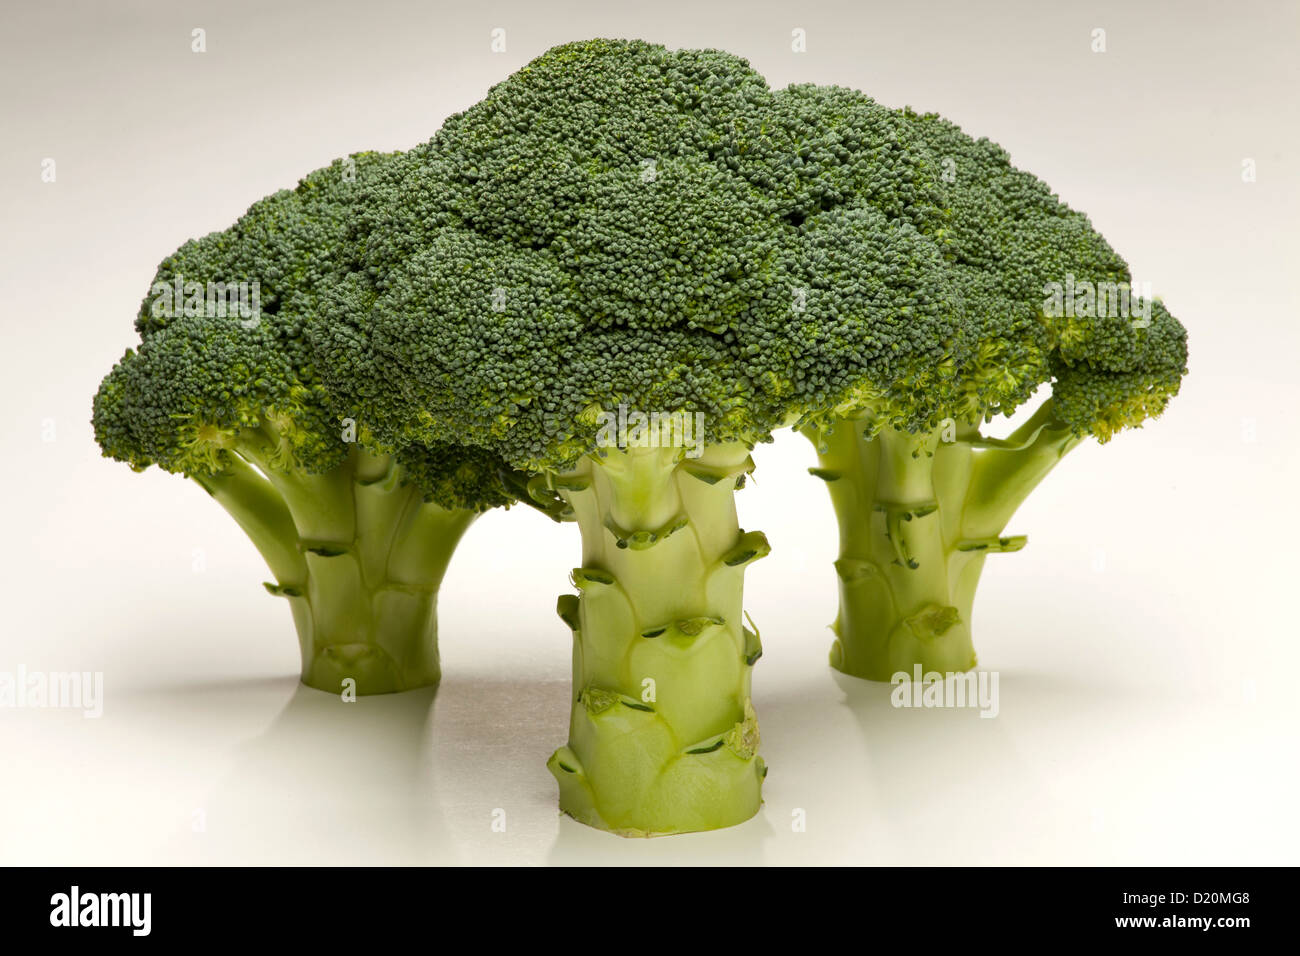 three stems of broccoli on white background or green vegetable Stock Photo